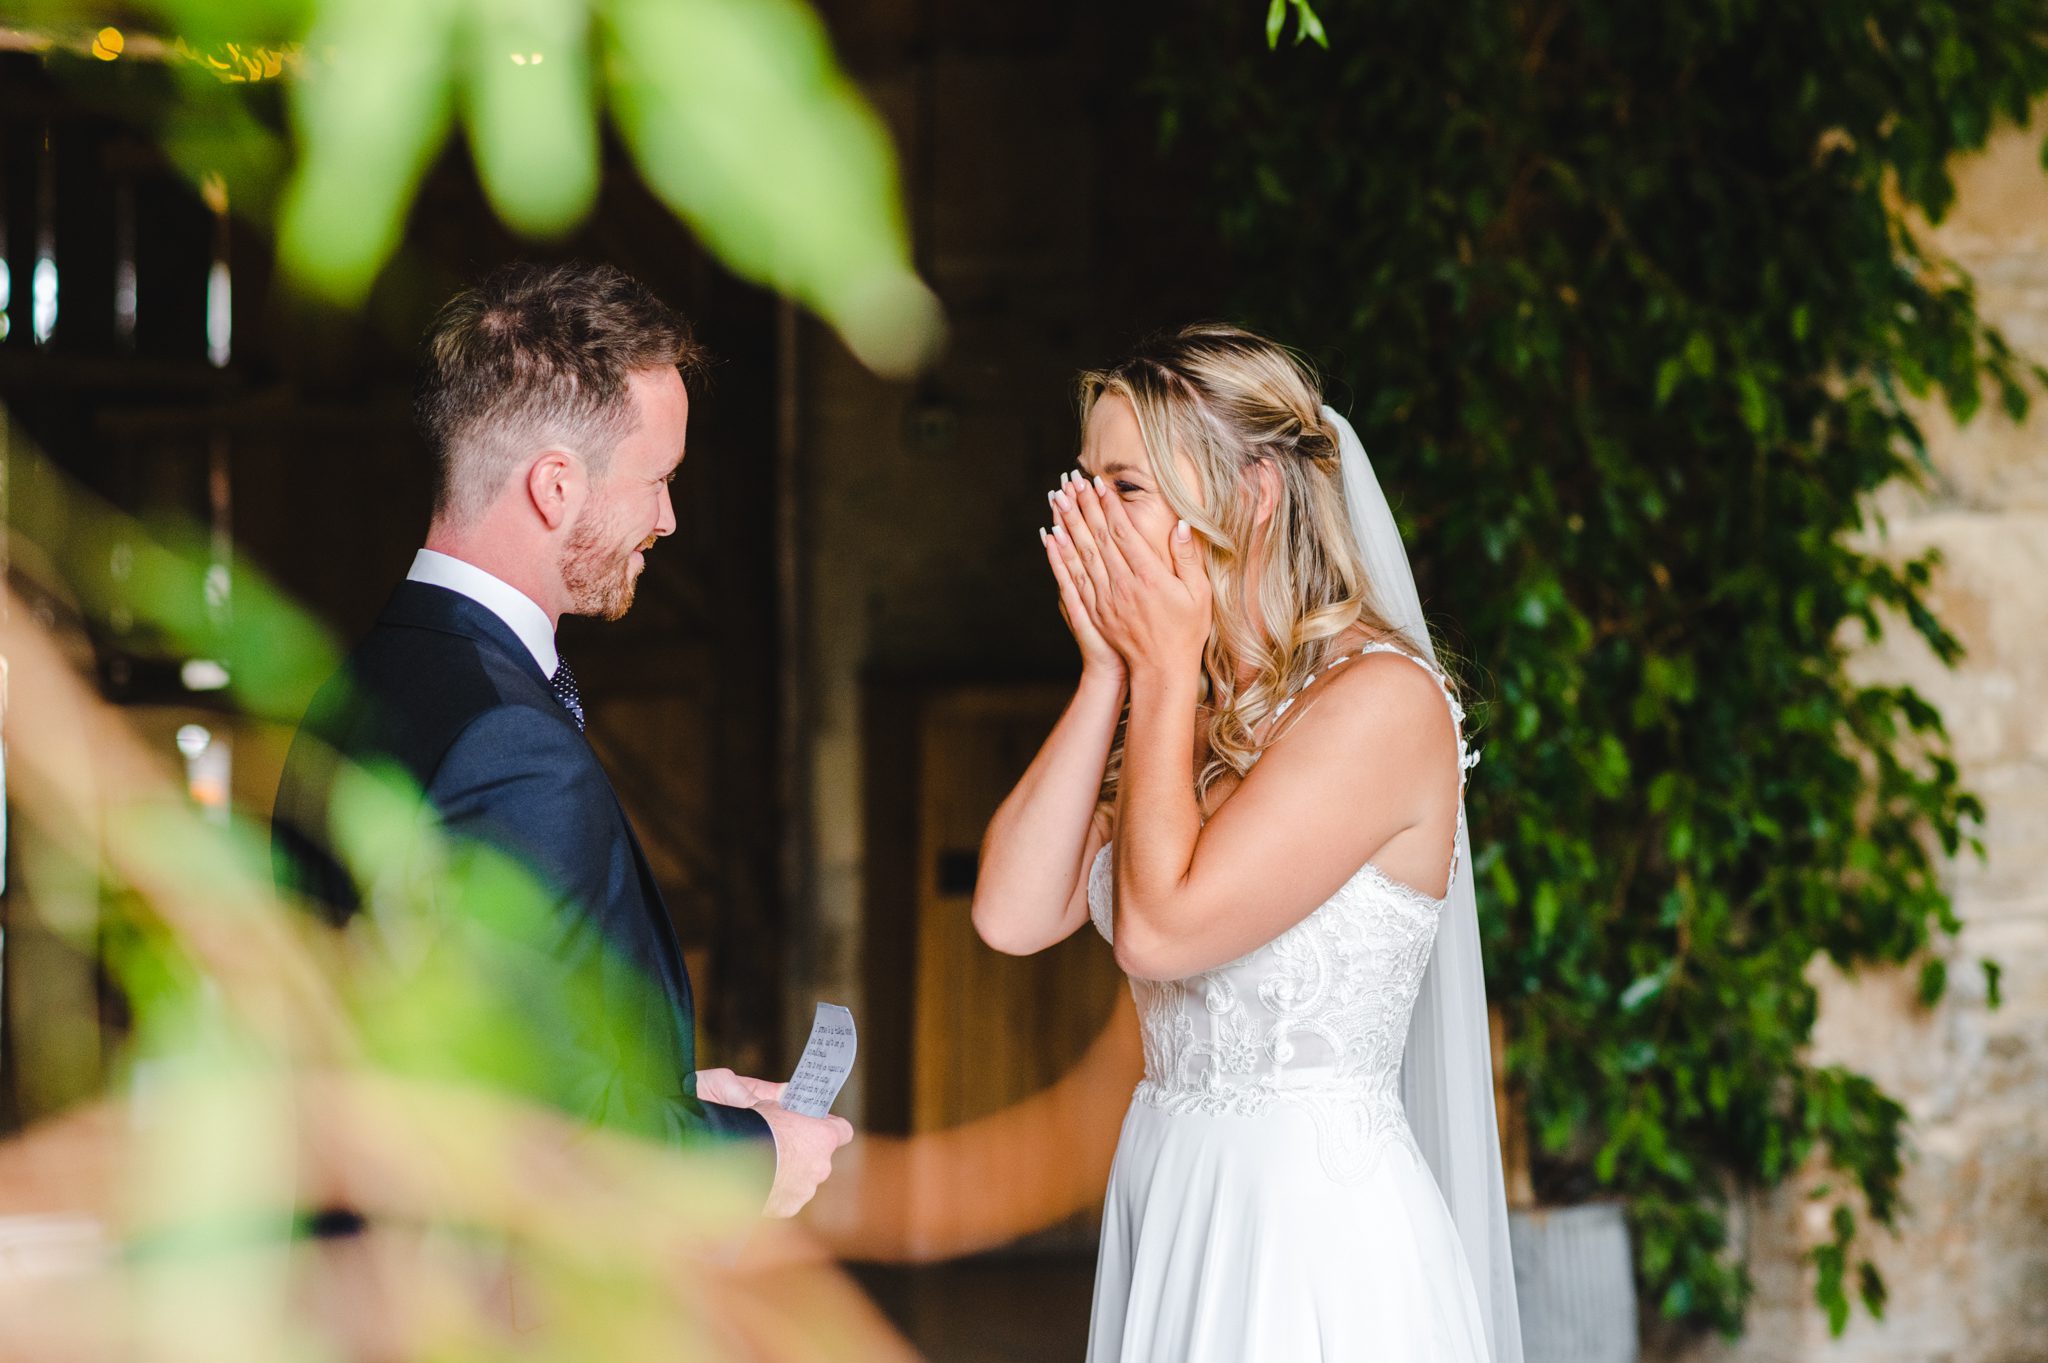 A bride crying at her grooms words during the ceremony at Stone Barn